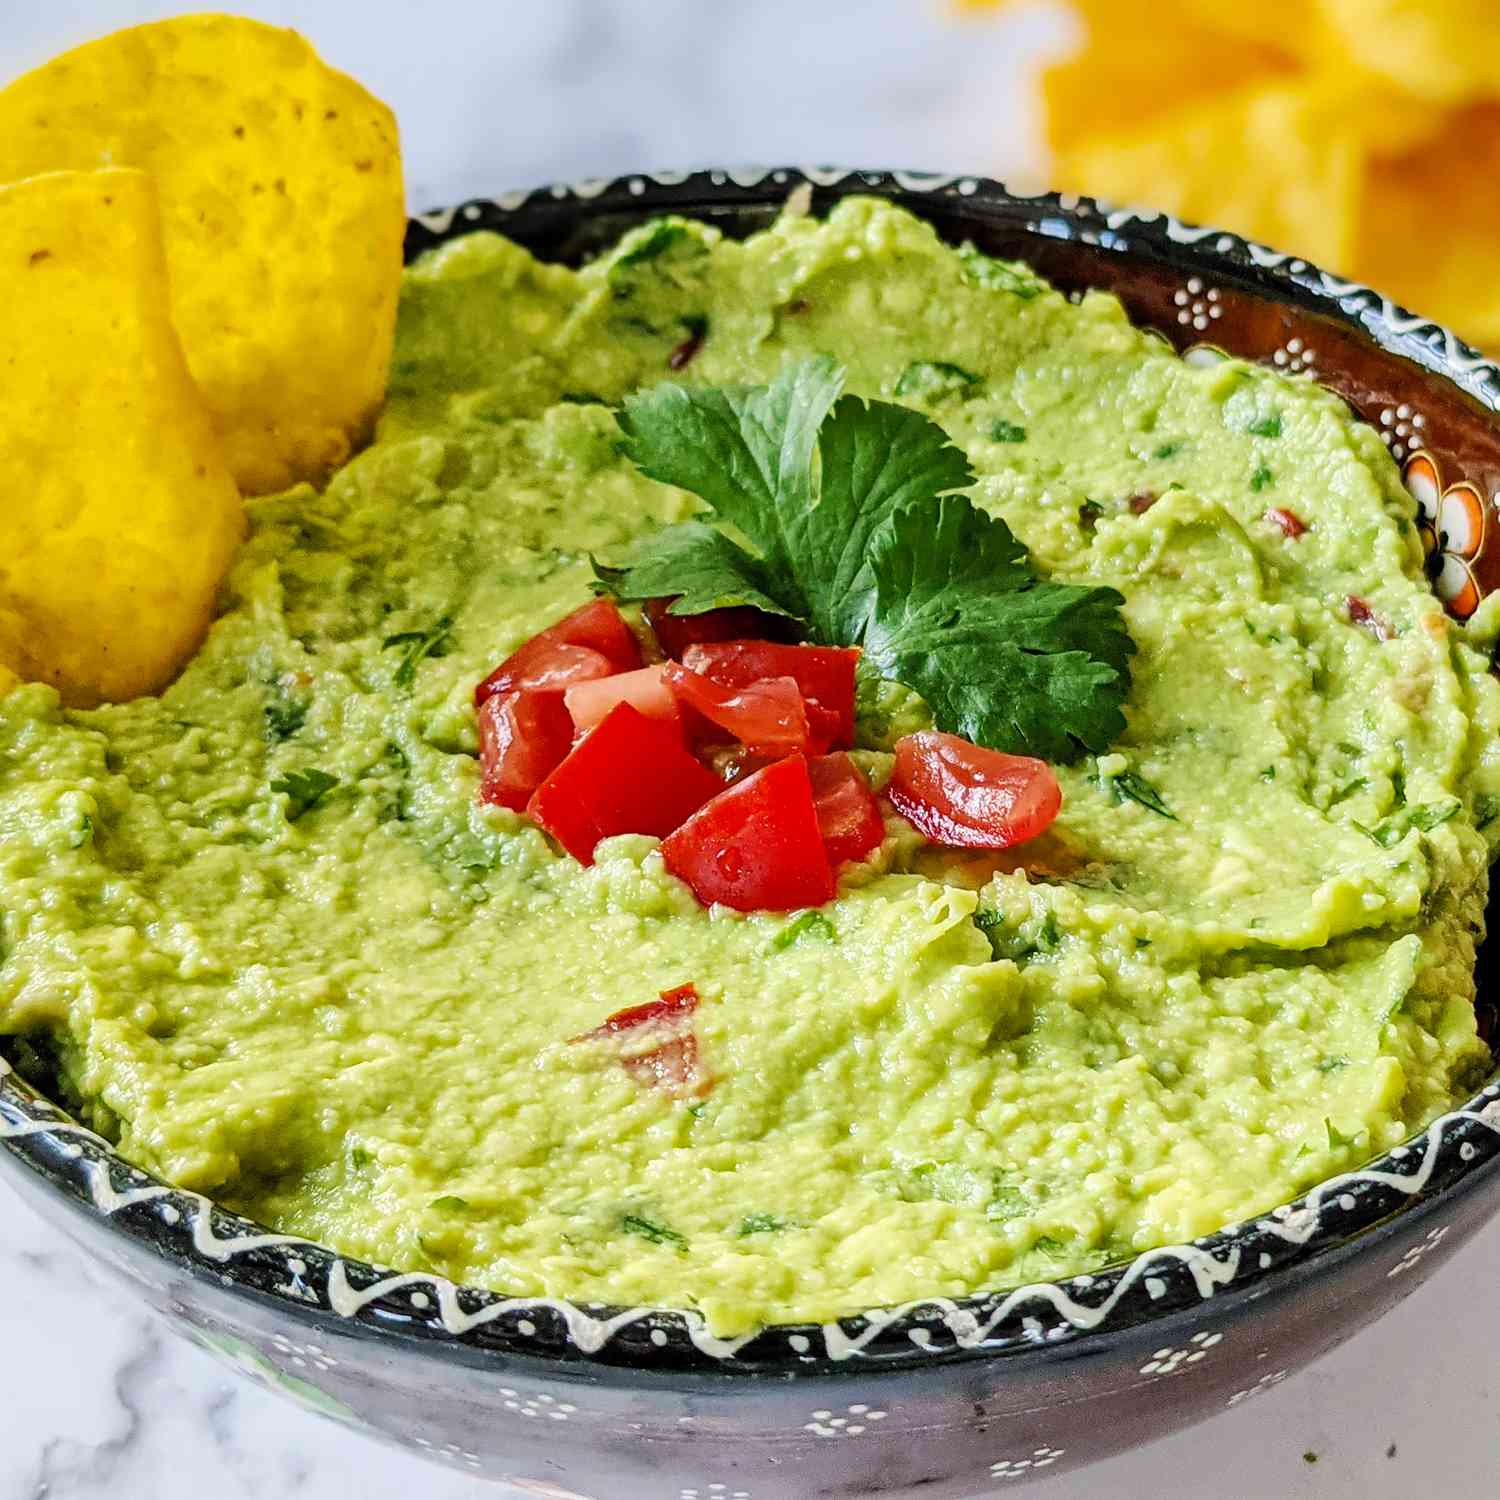 A low angle, close-up view of a bowl of fresh guacamole topped with diced tomatoes and parsley and served with tortilla chips.